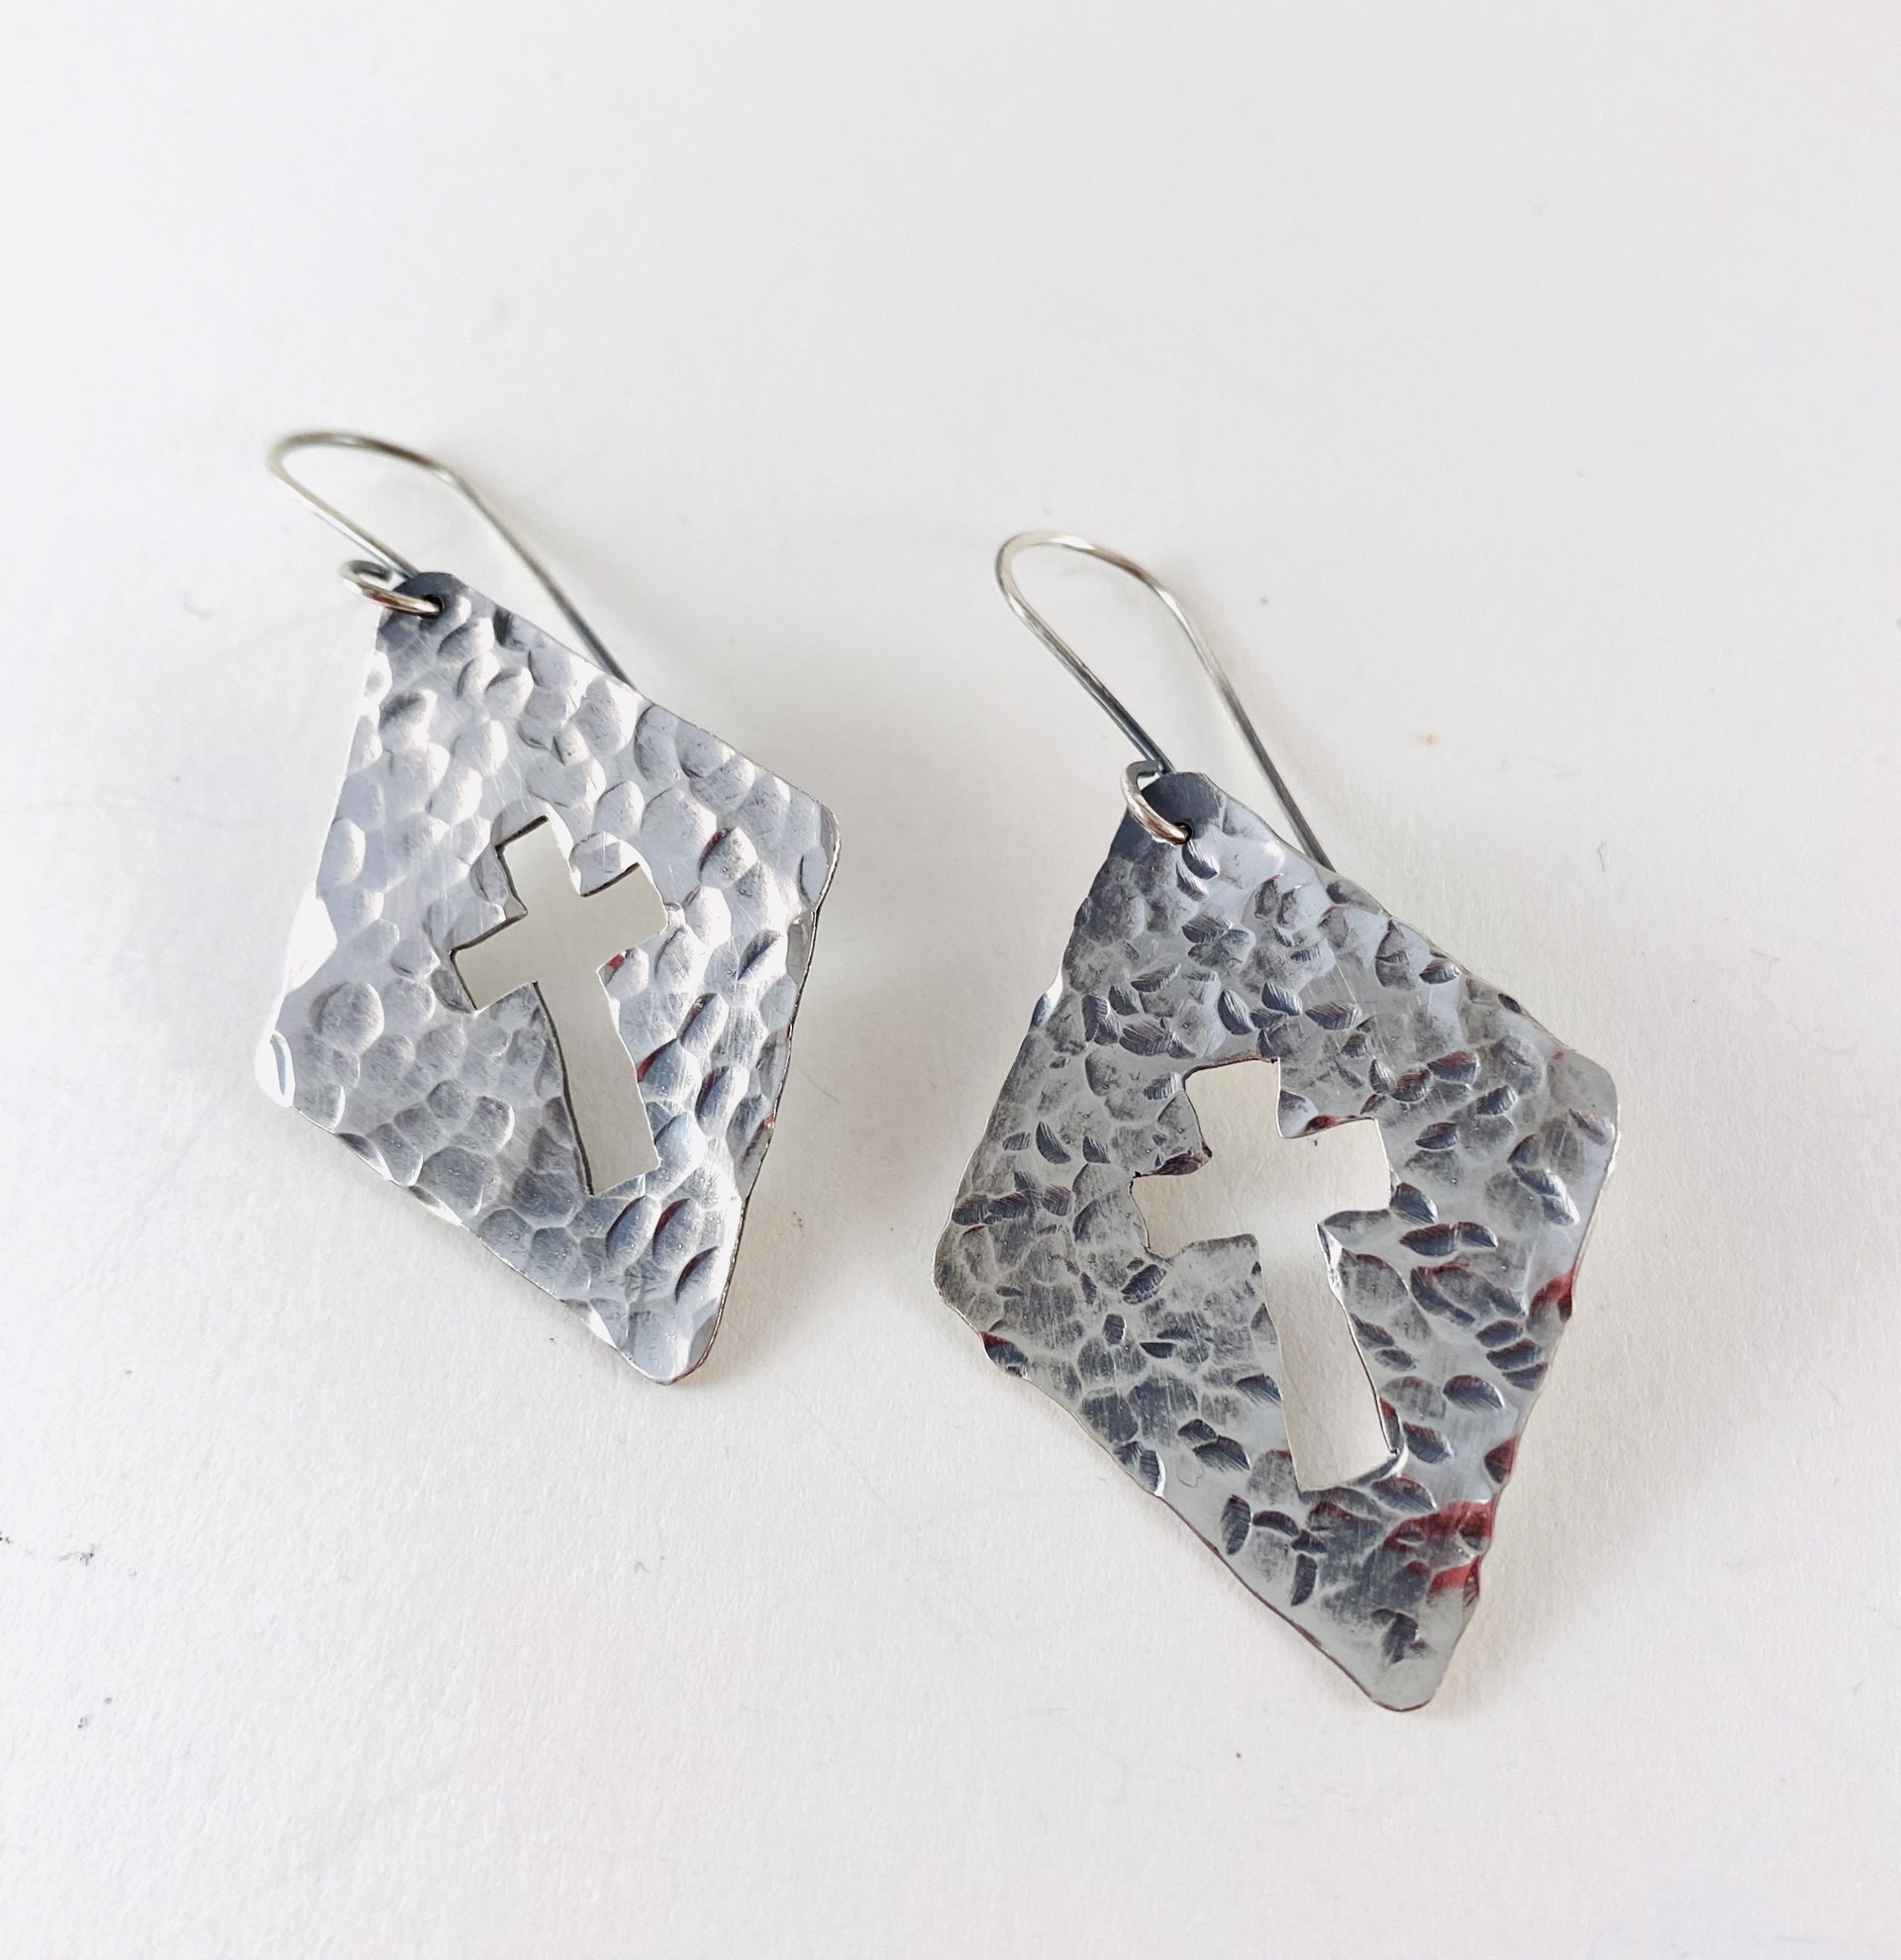 AB20-12 Hand Hammered and Cross Cut Out Silver Earrings by Anne Bivens